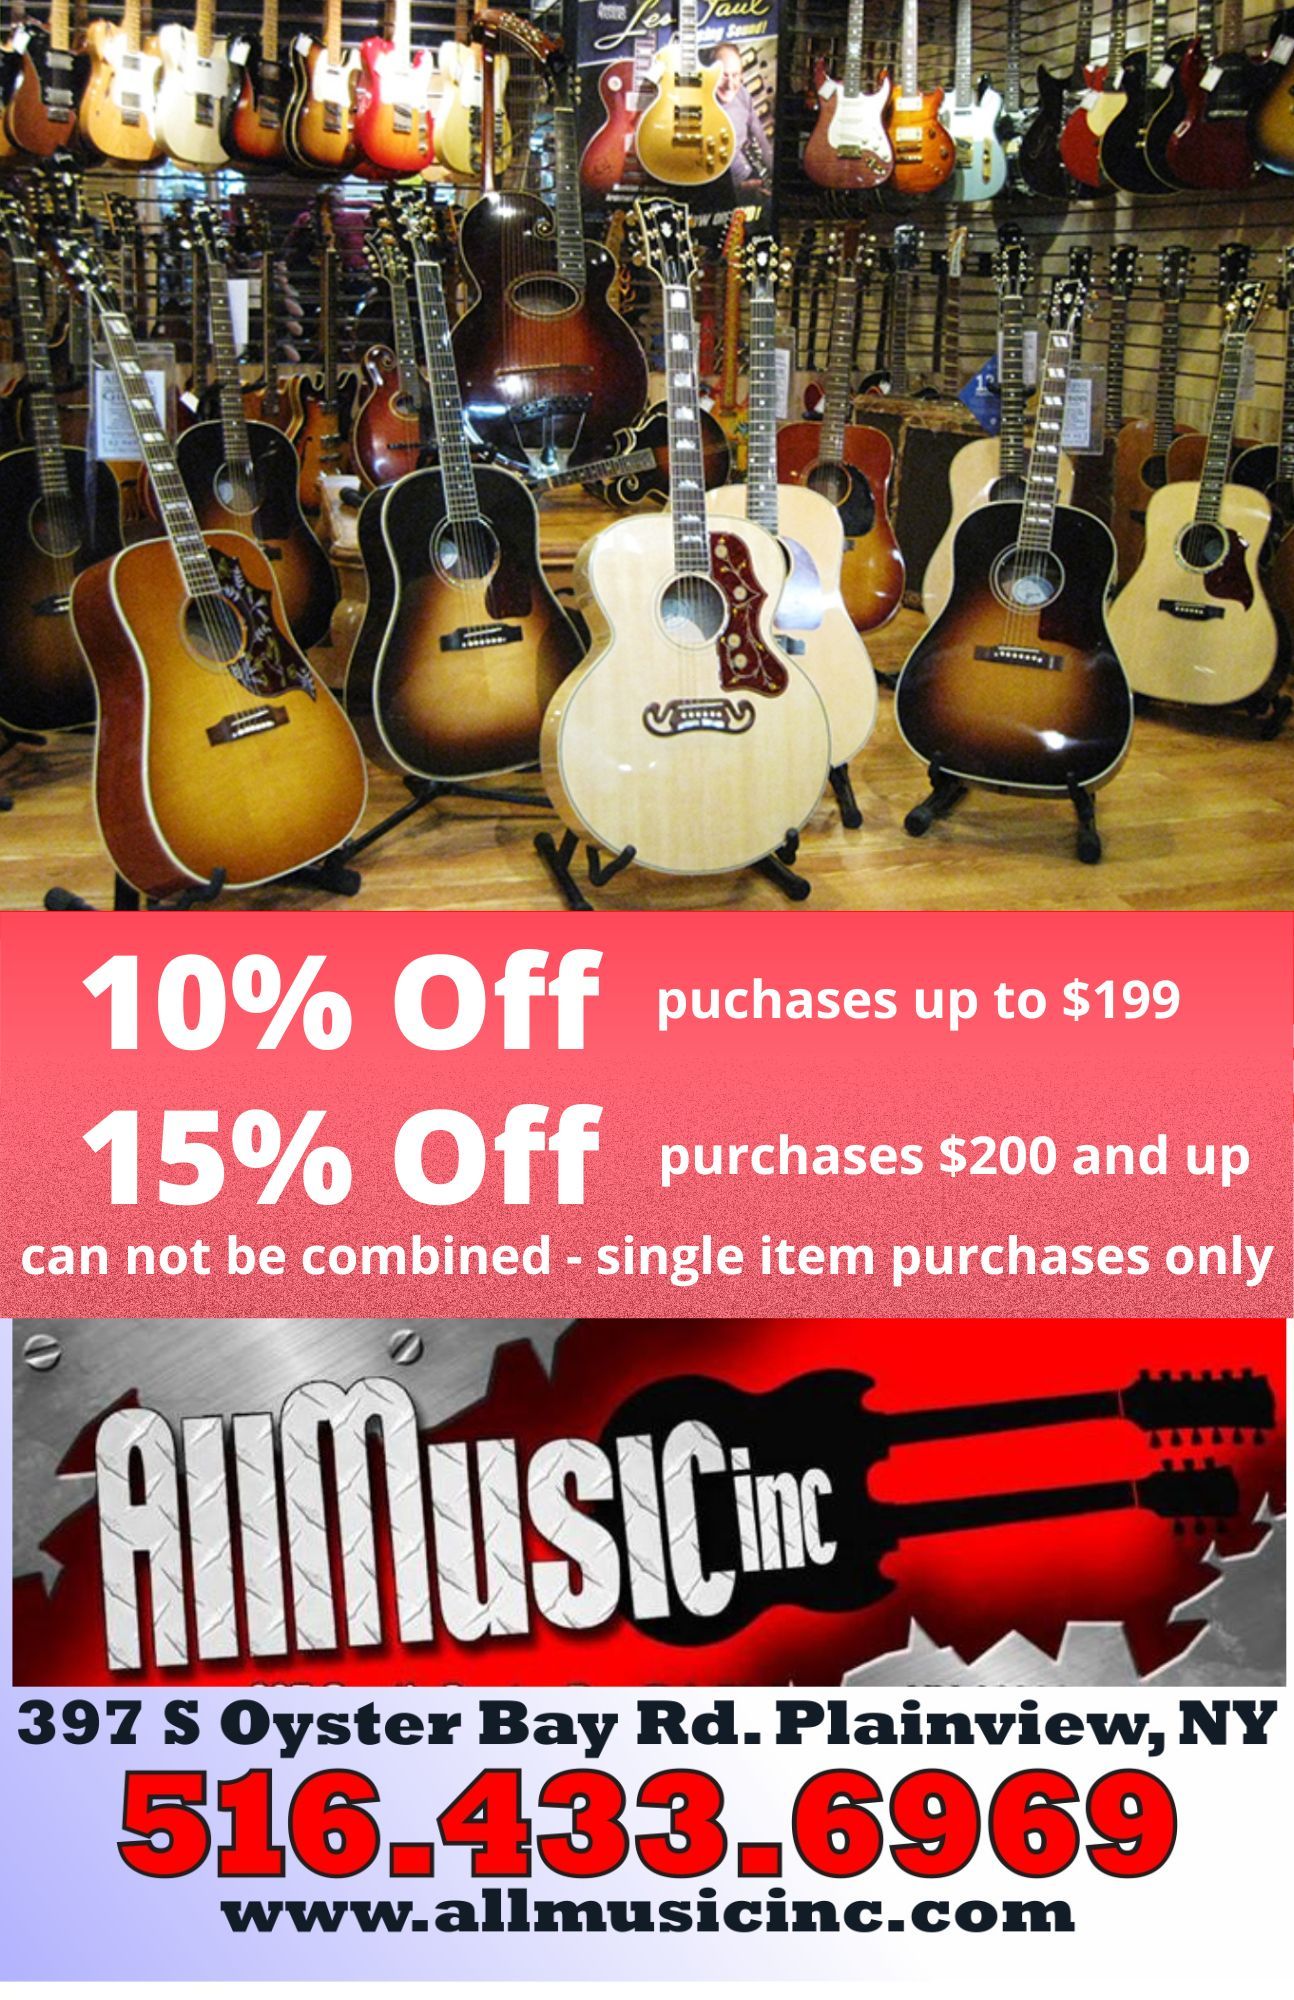 An advertisement for allmusic inc. in plainview new york